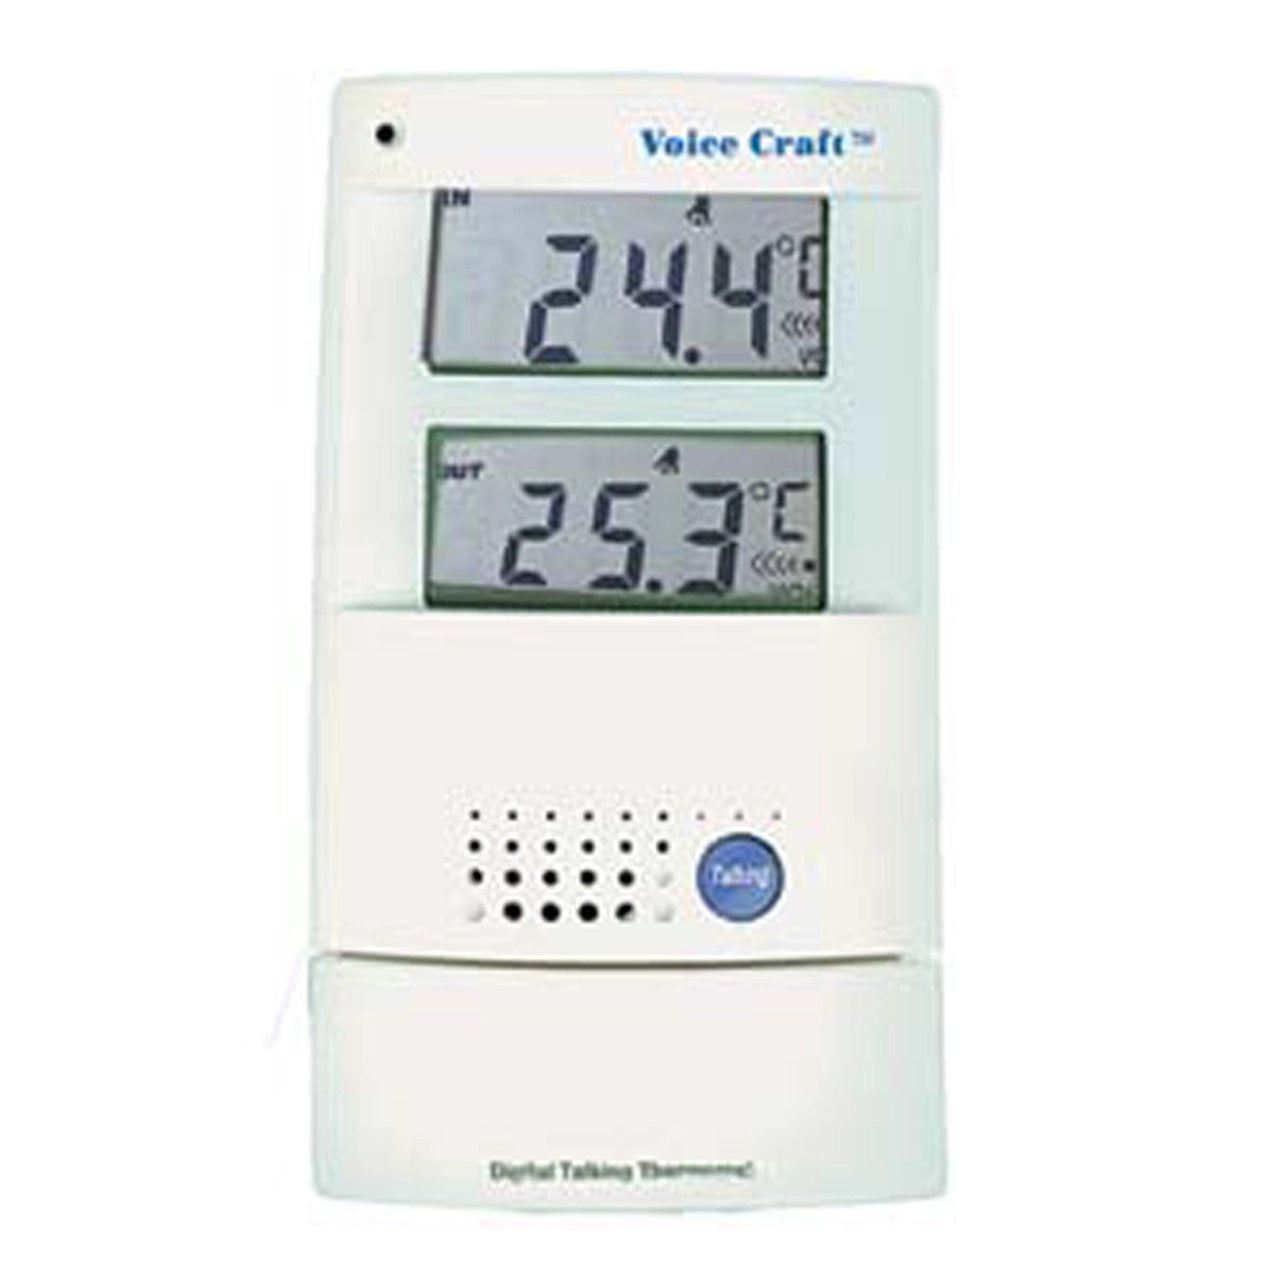 The Talking Indoor Outdoor Thermometer has a large dual display for those with low vision that shows indoor and outdoor temperatures and announces.